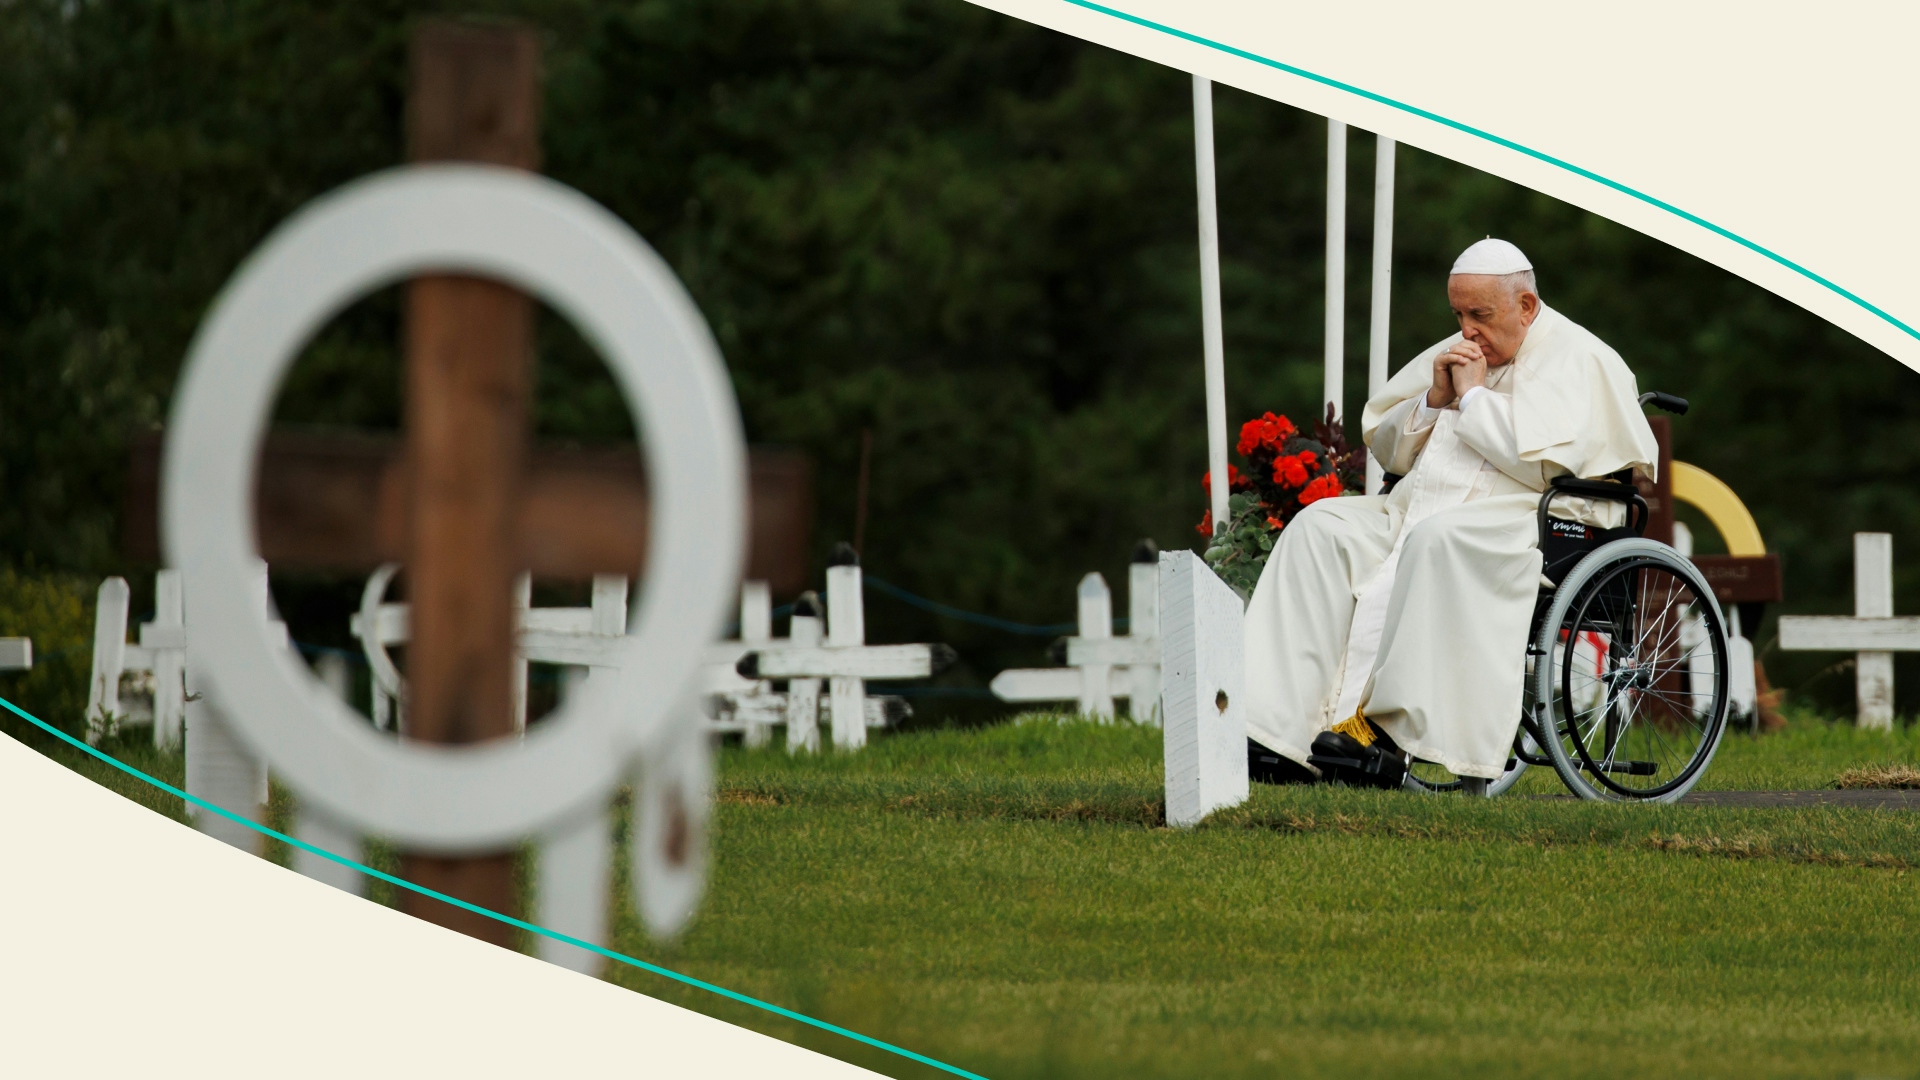 Pope Francis prays during a pause in the Ermineskin Cemetery during his visit on July 25, 2022 in Maskwacis, Canada. 